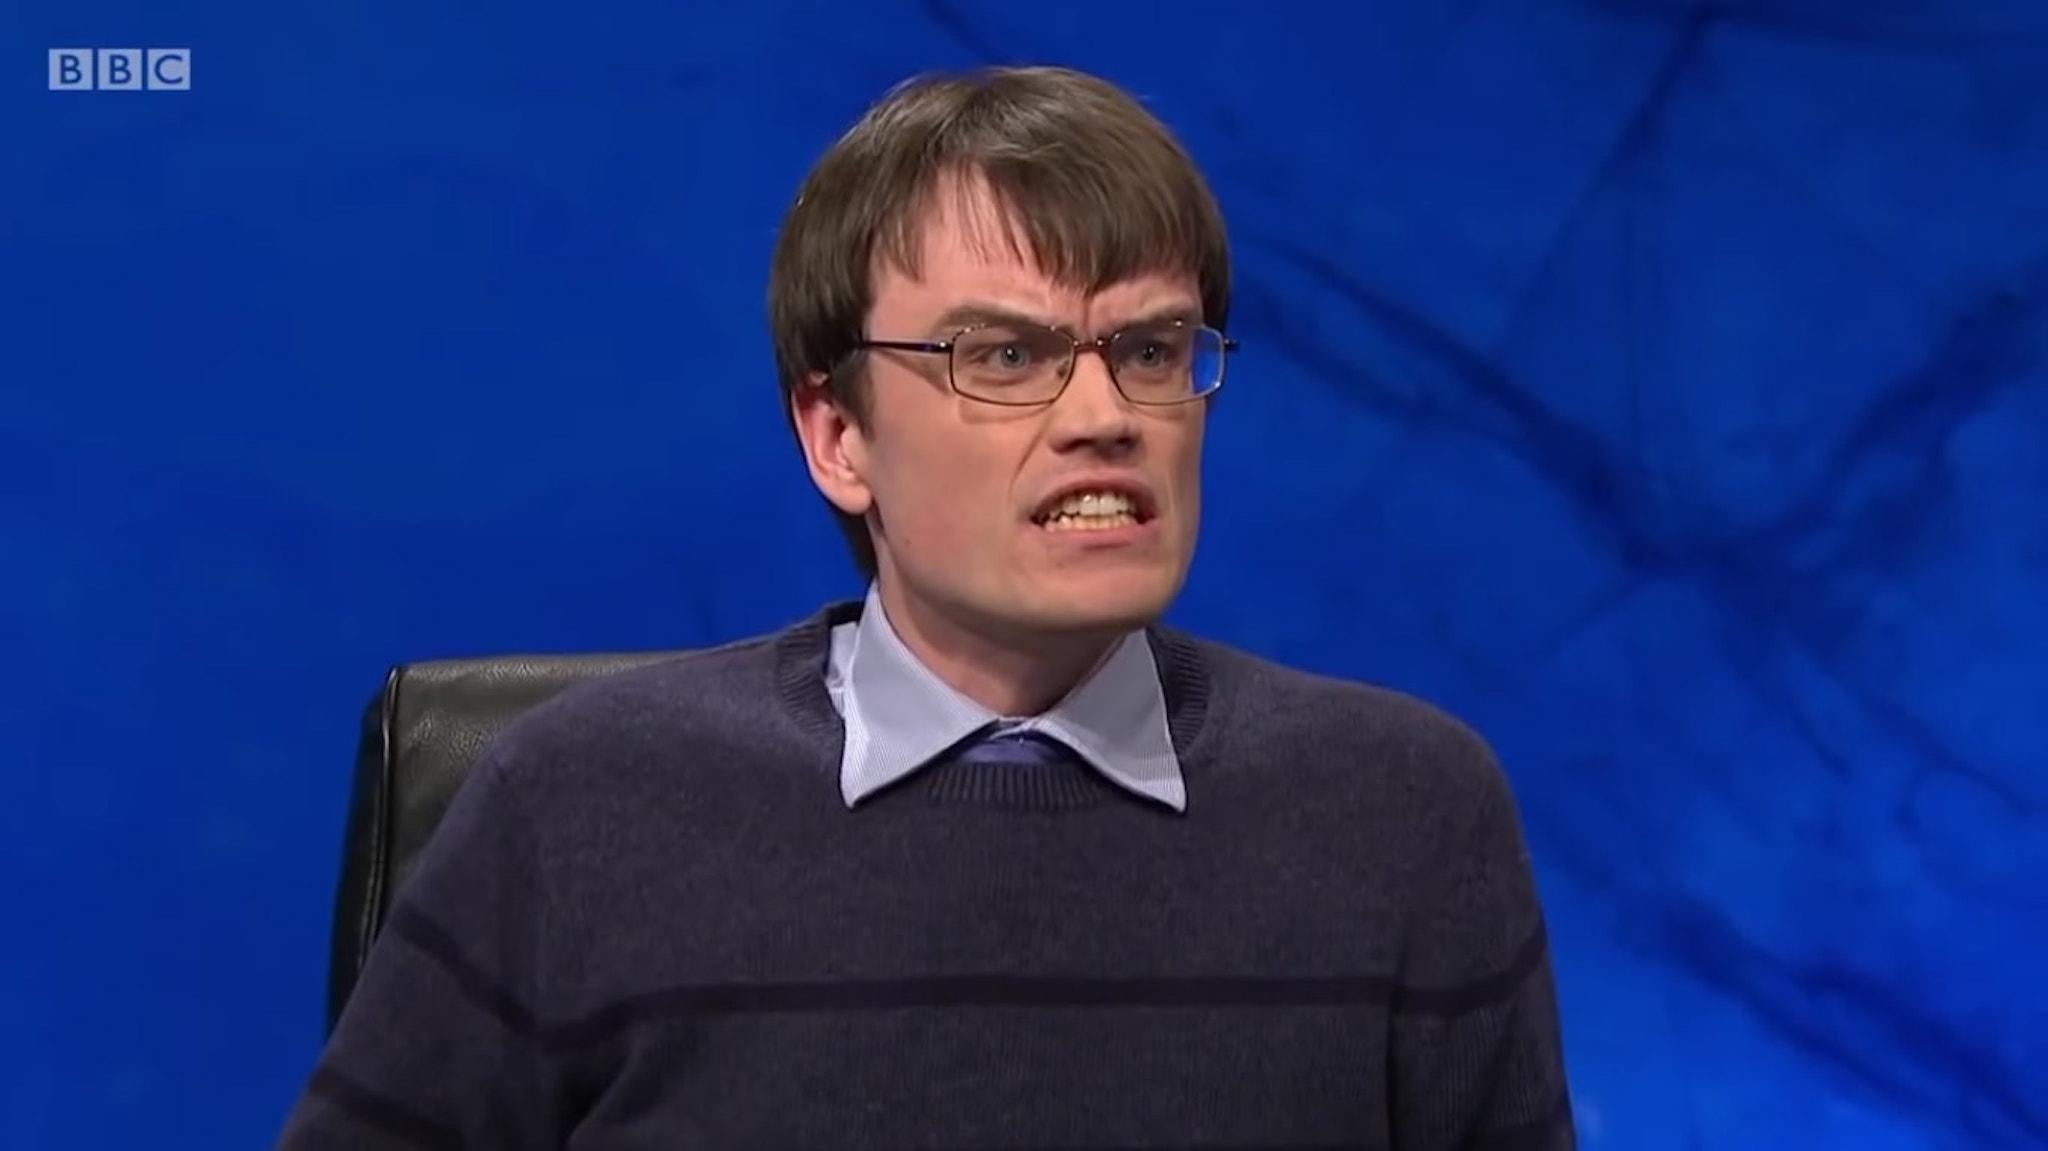 Eric Monkman has captured the hearts and minds of University Challenge fans with his expressive face and manner